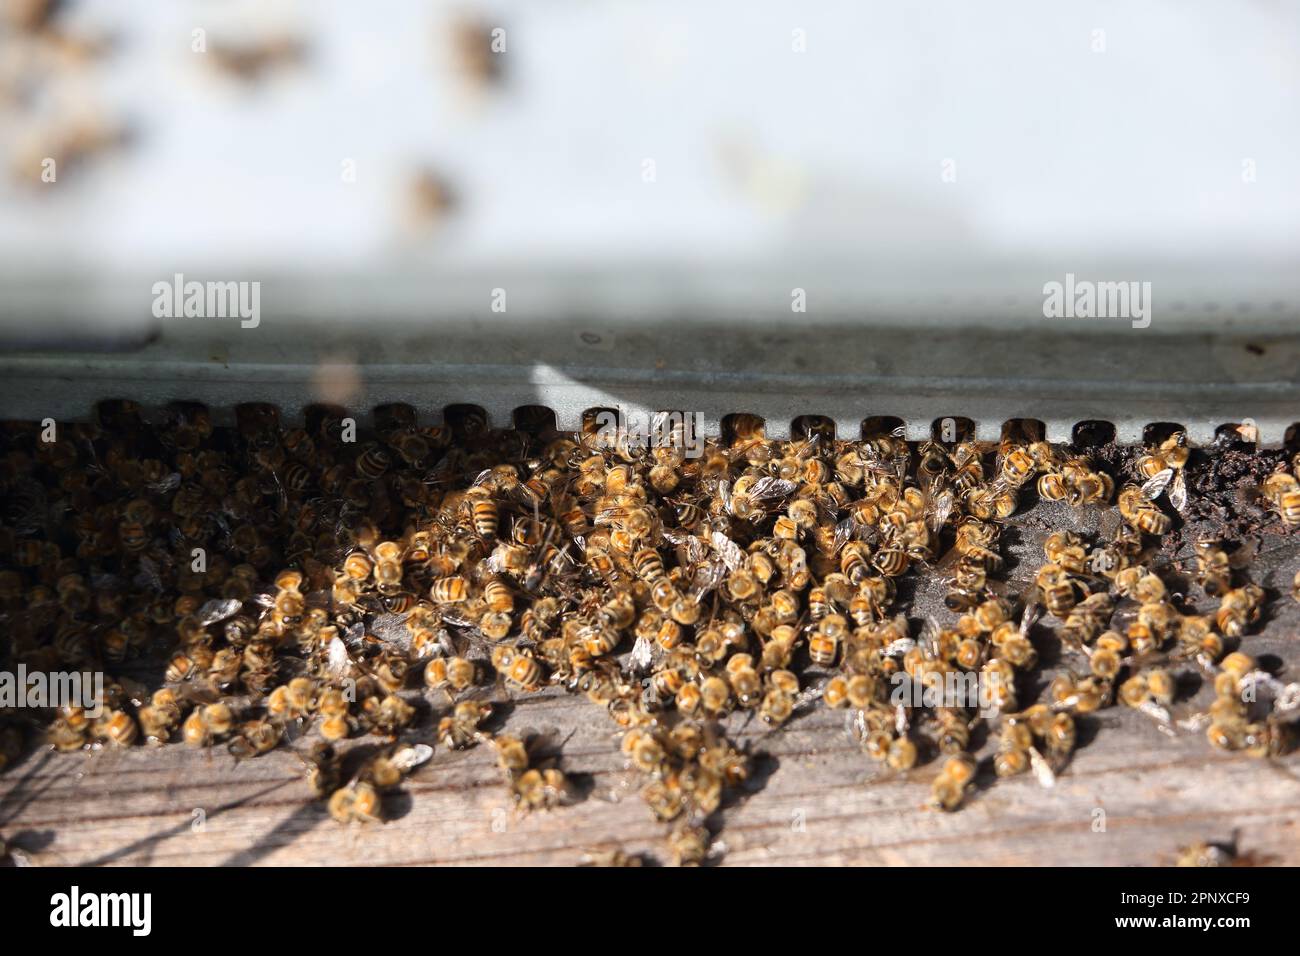 beekeeping and pollution, bee death Stock Photo